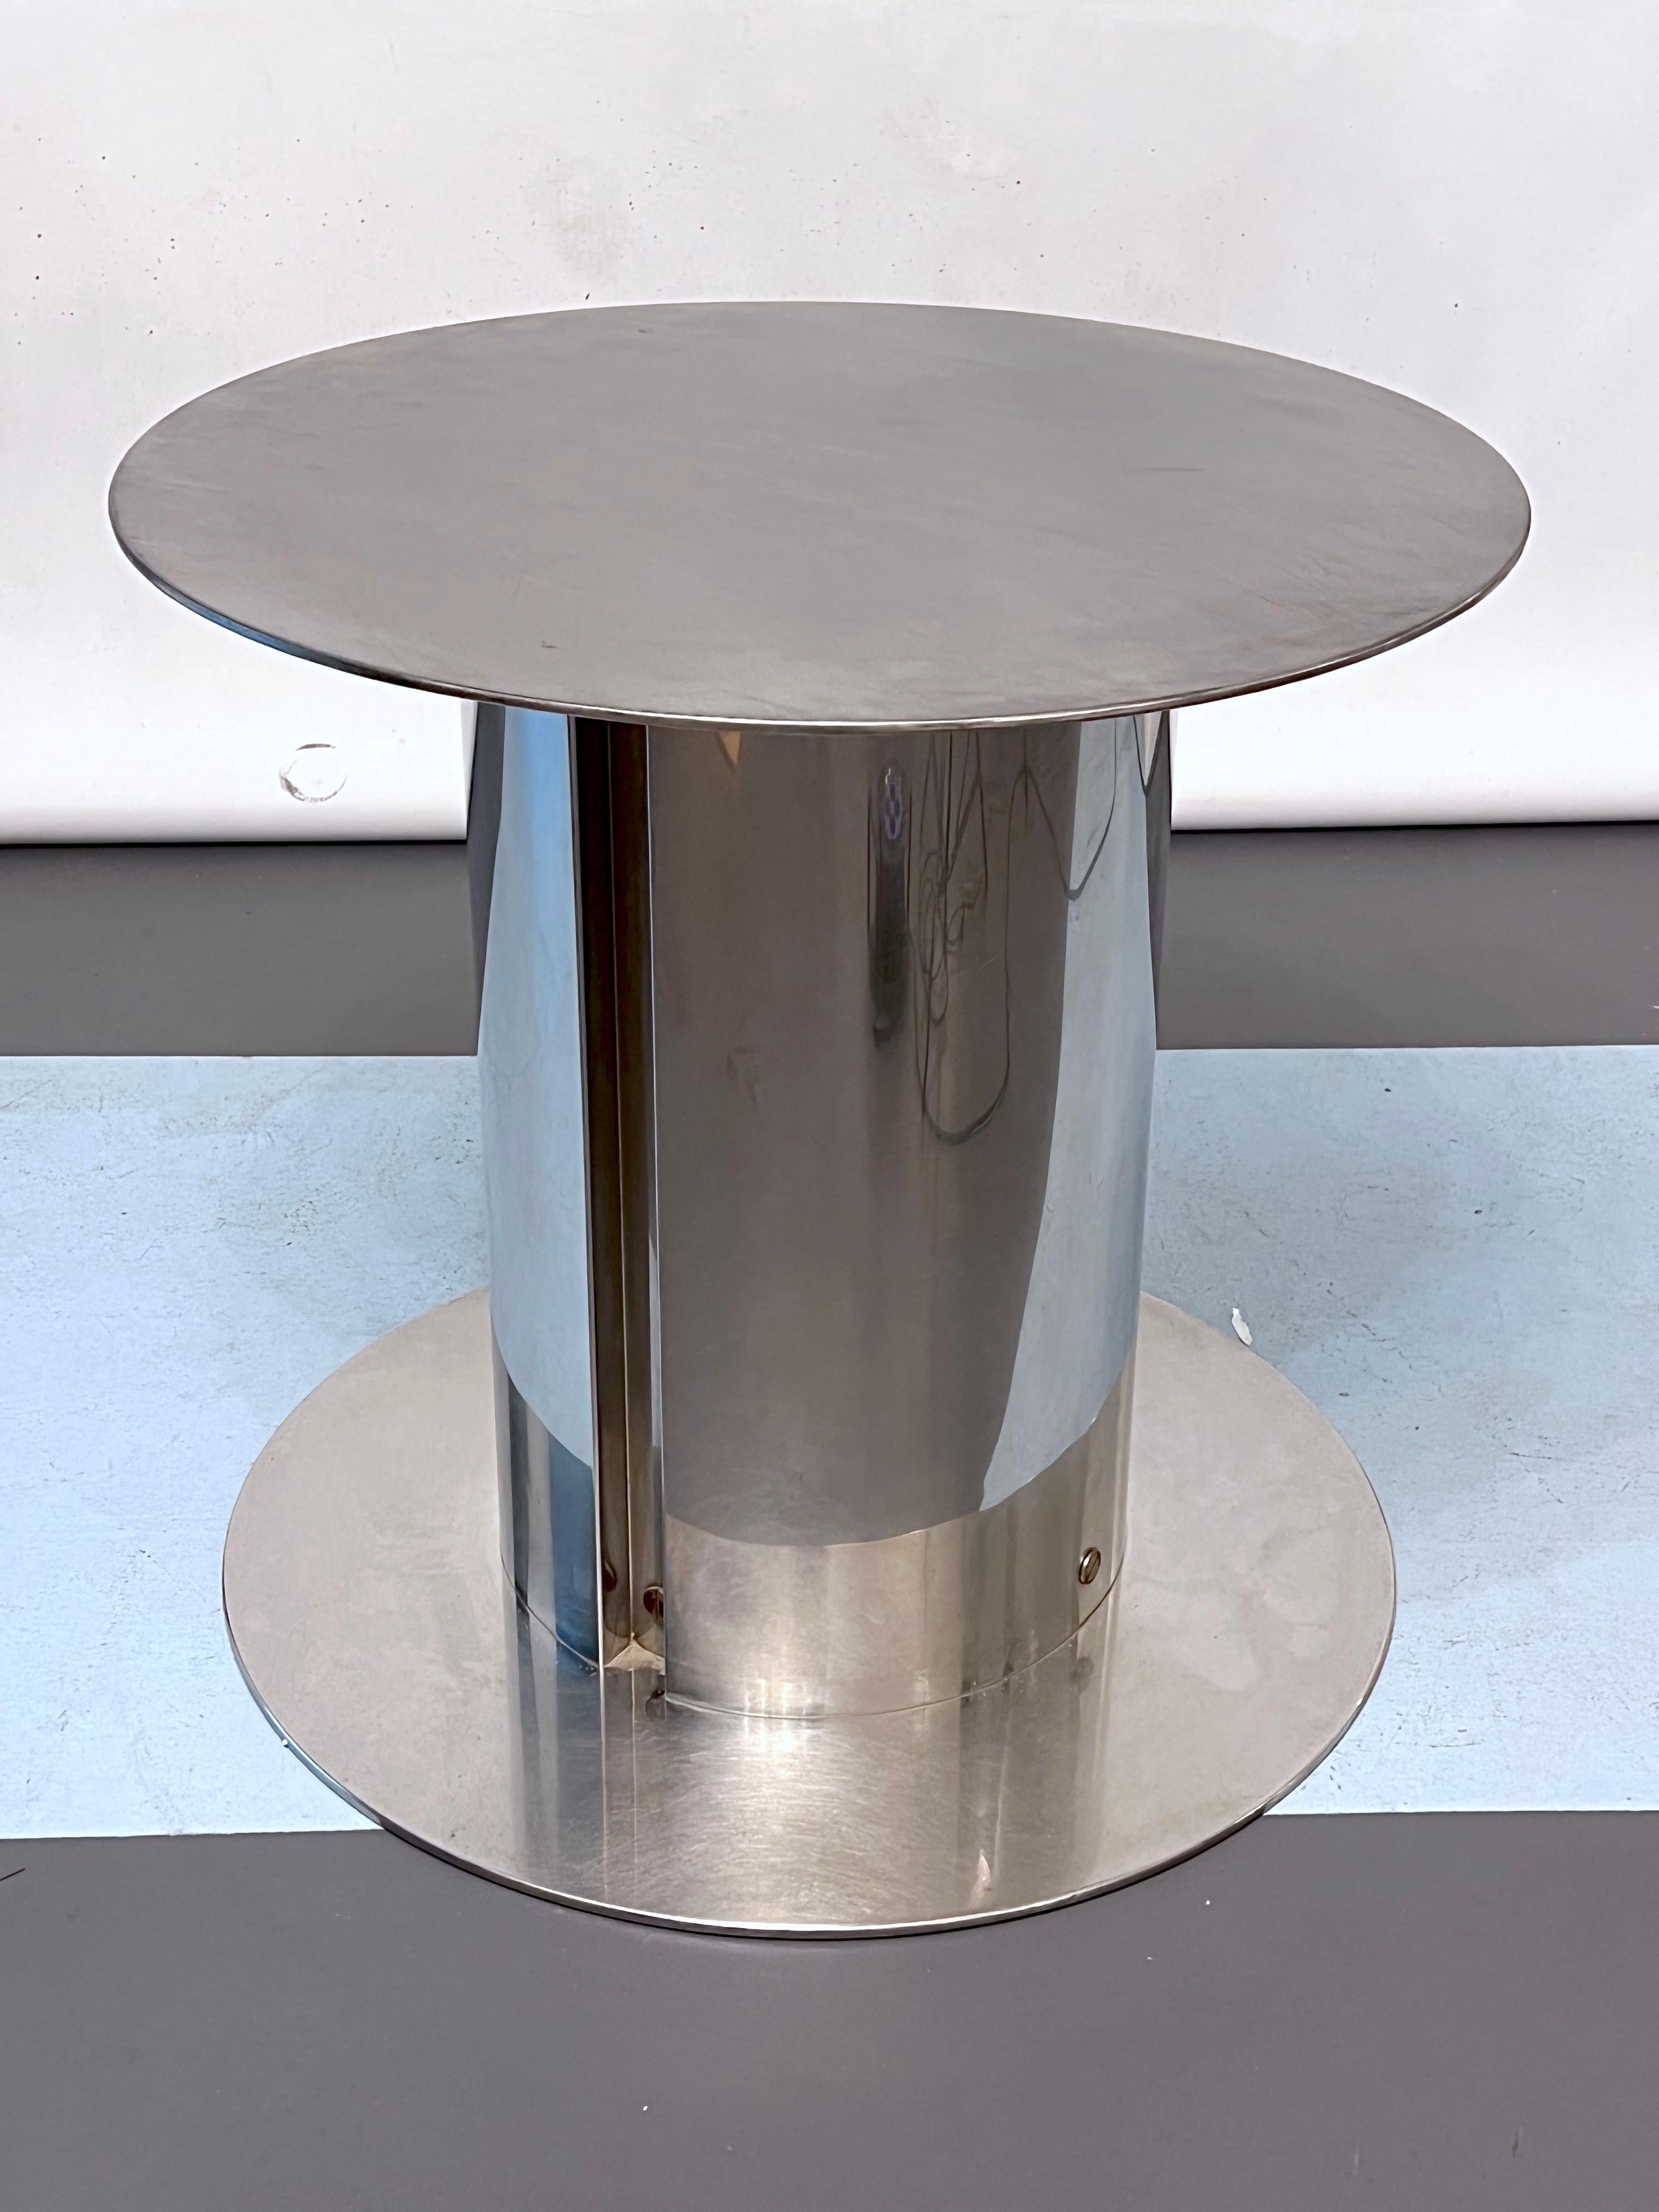 Great vintage condition with normal trace of age and use for this 1st edition of the Cidonio round dining table designed by Antonia Astori for Driade and produced in Italy during the 60s. stainless steel base and thick clear glass top.